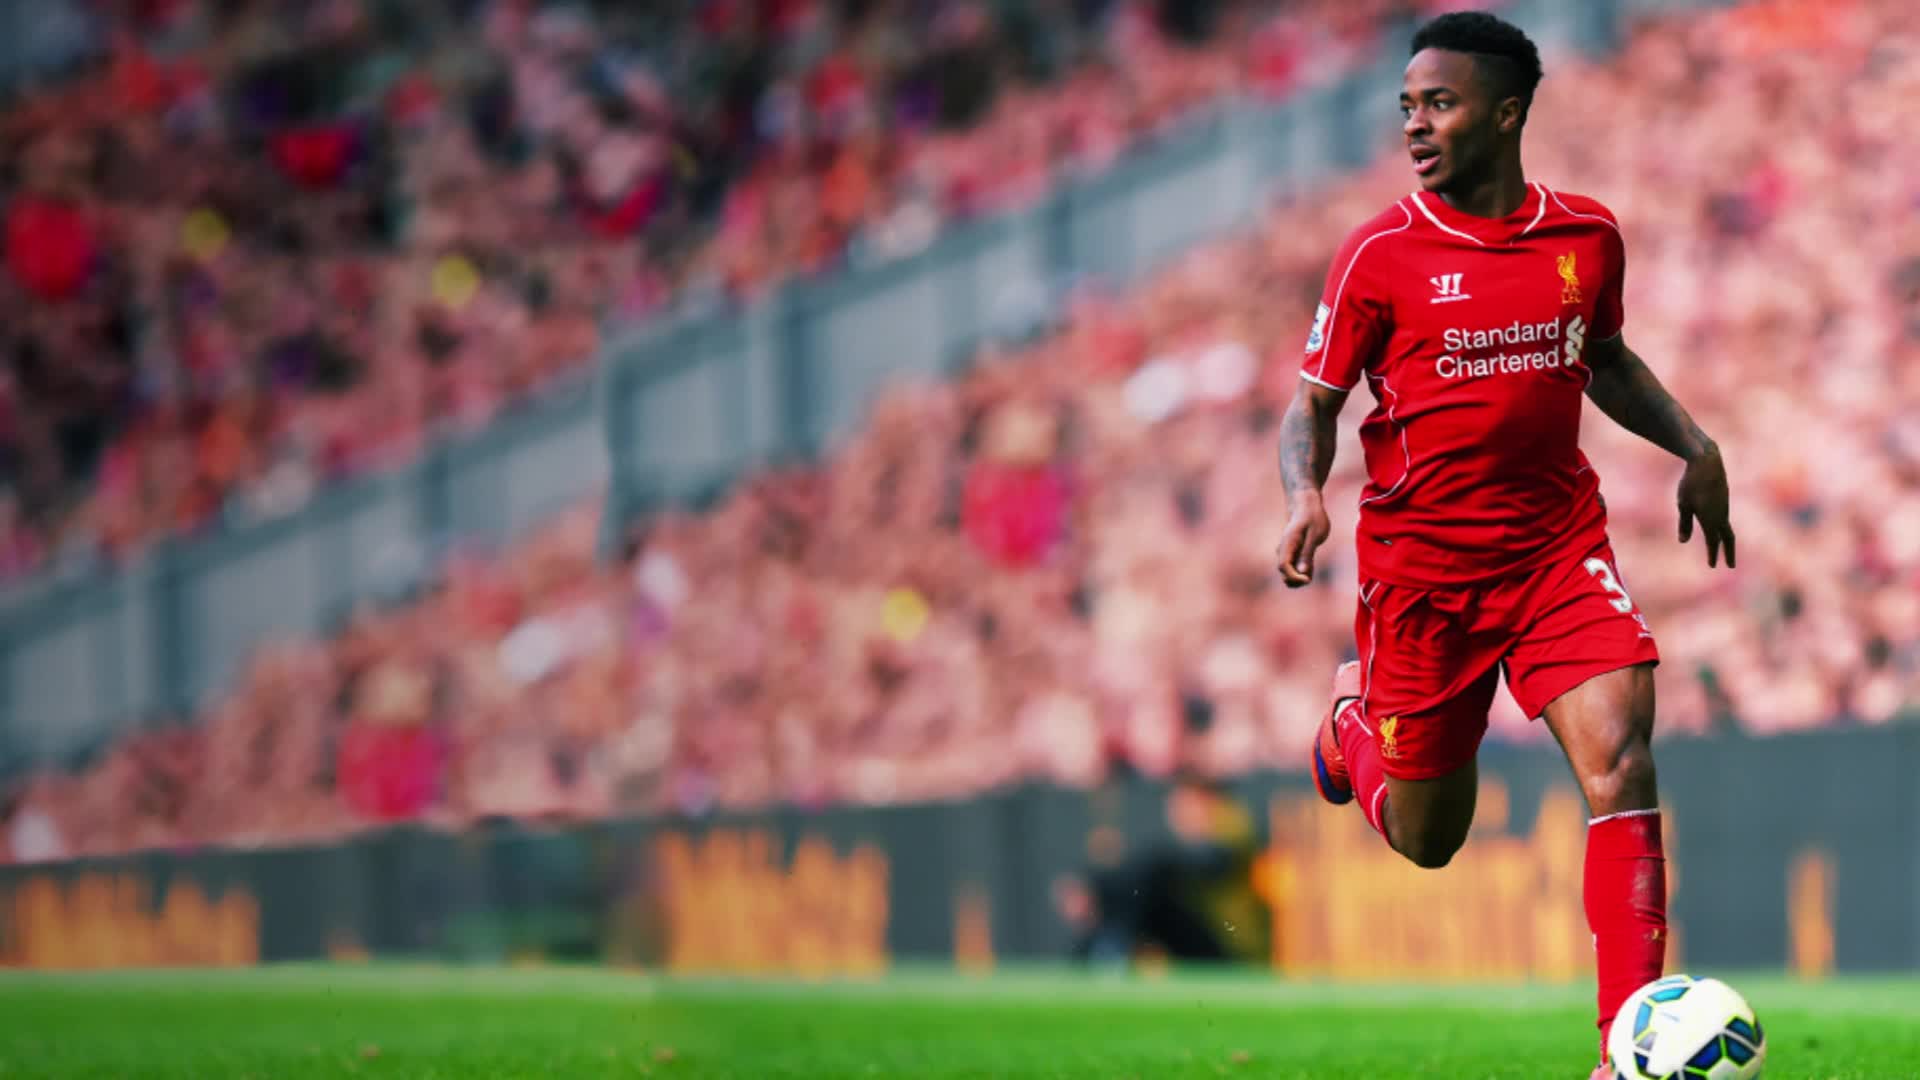 Raheem Sterling seals move from Liverpool to Manchester City